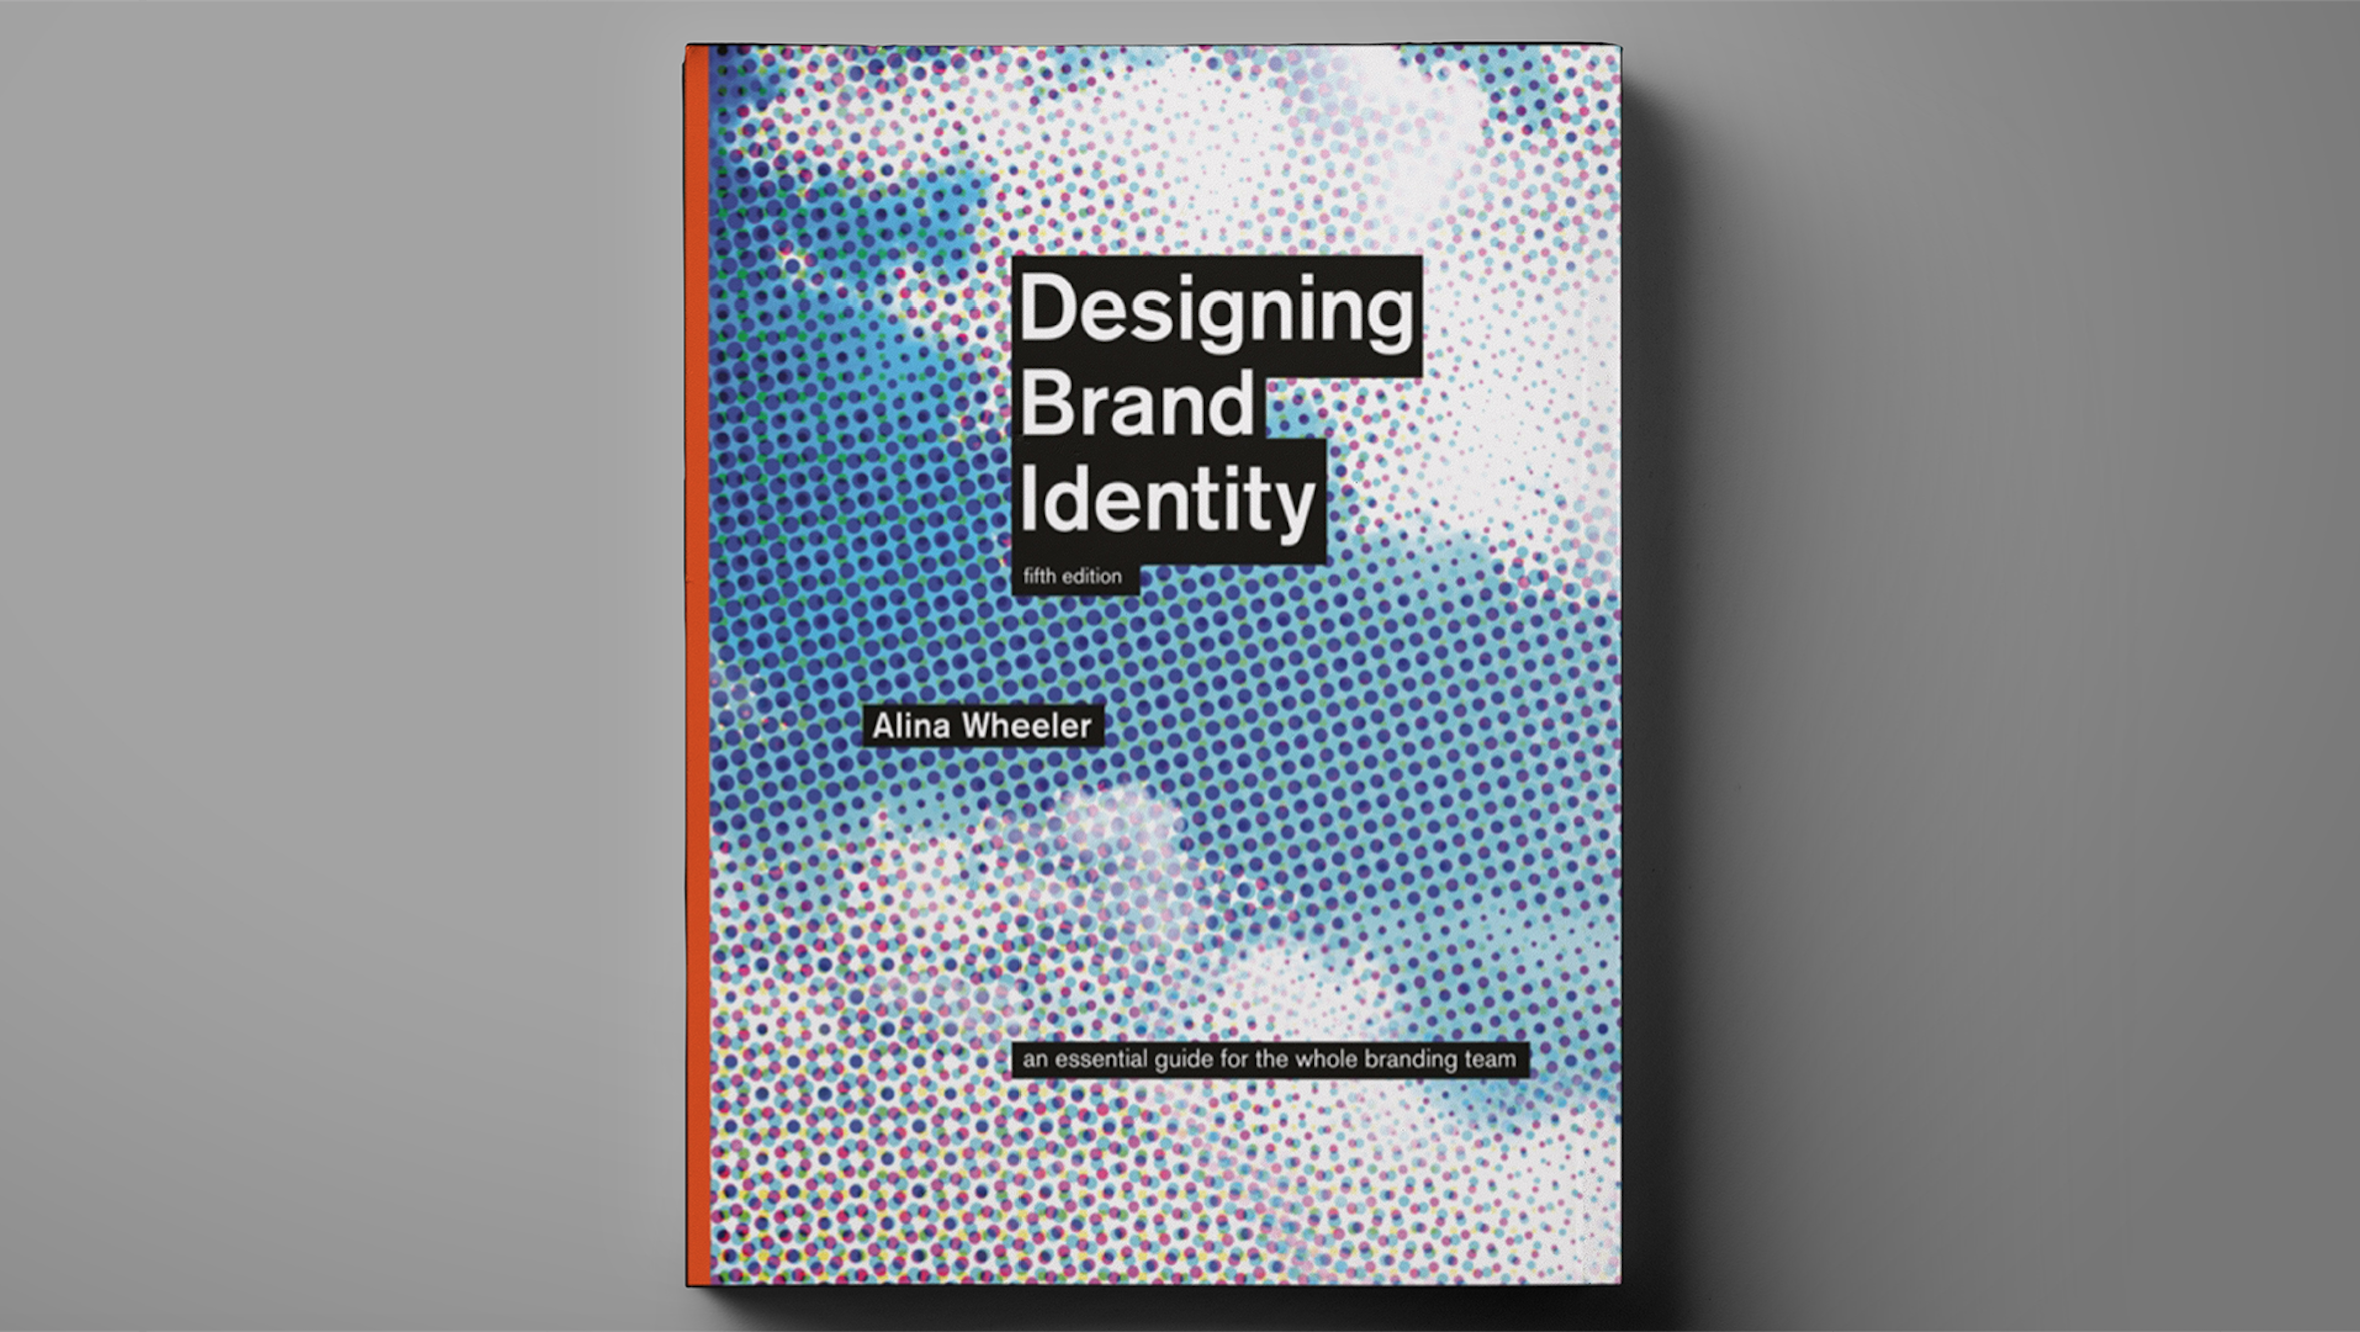 The 38 best graphic design books on branding, logos, type and more